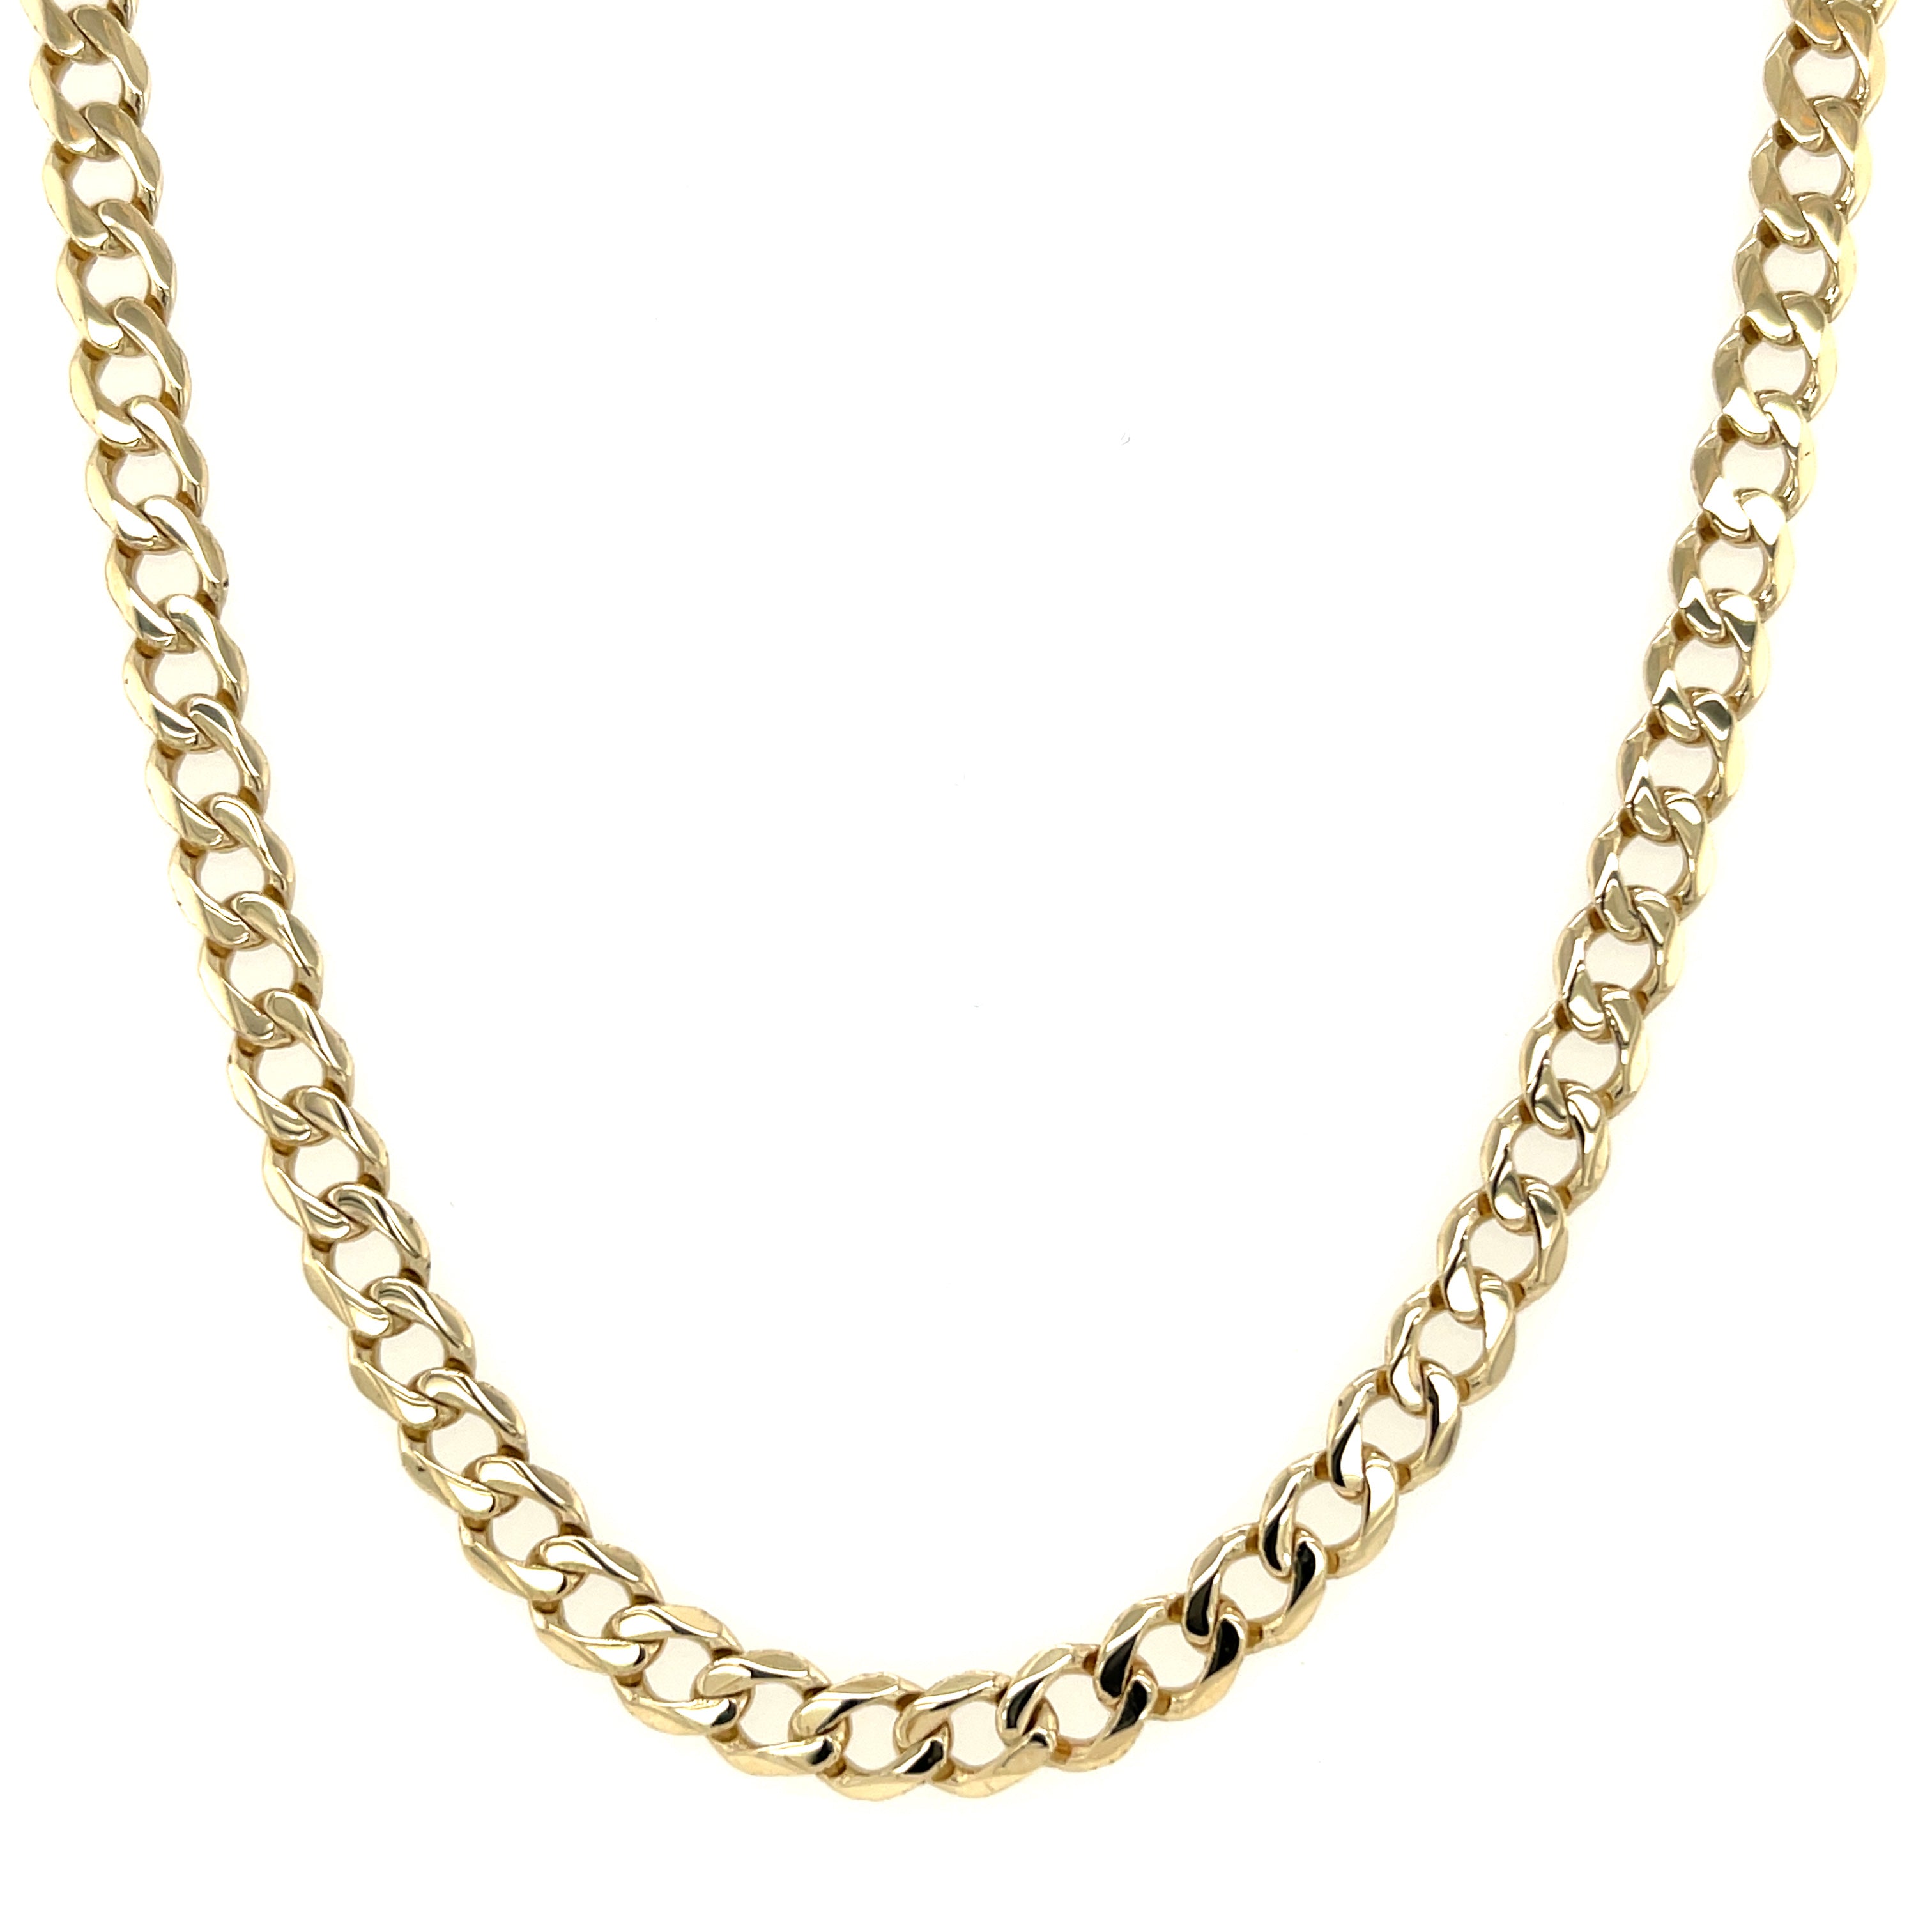 9ct Yellow Gold 19 Inch Curb Link Chain - 18.75g